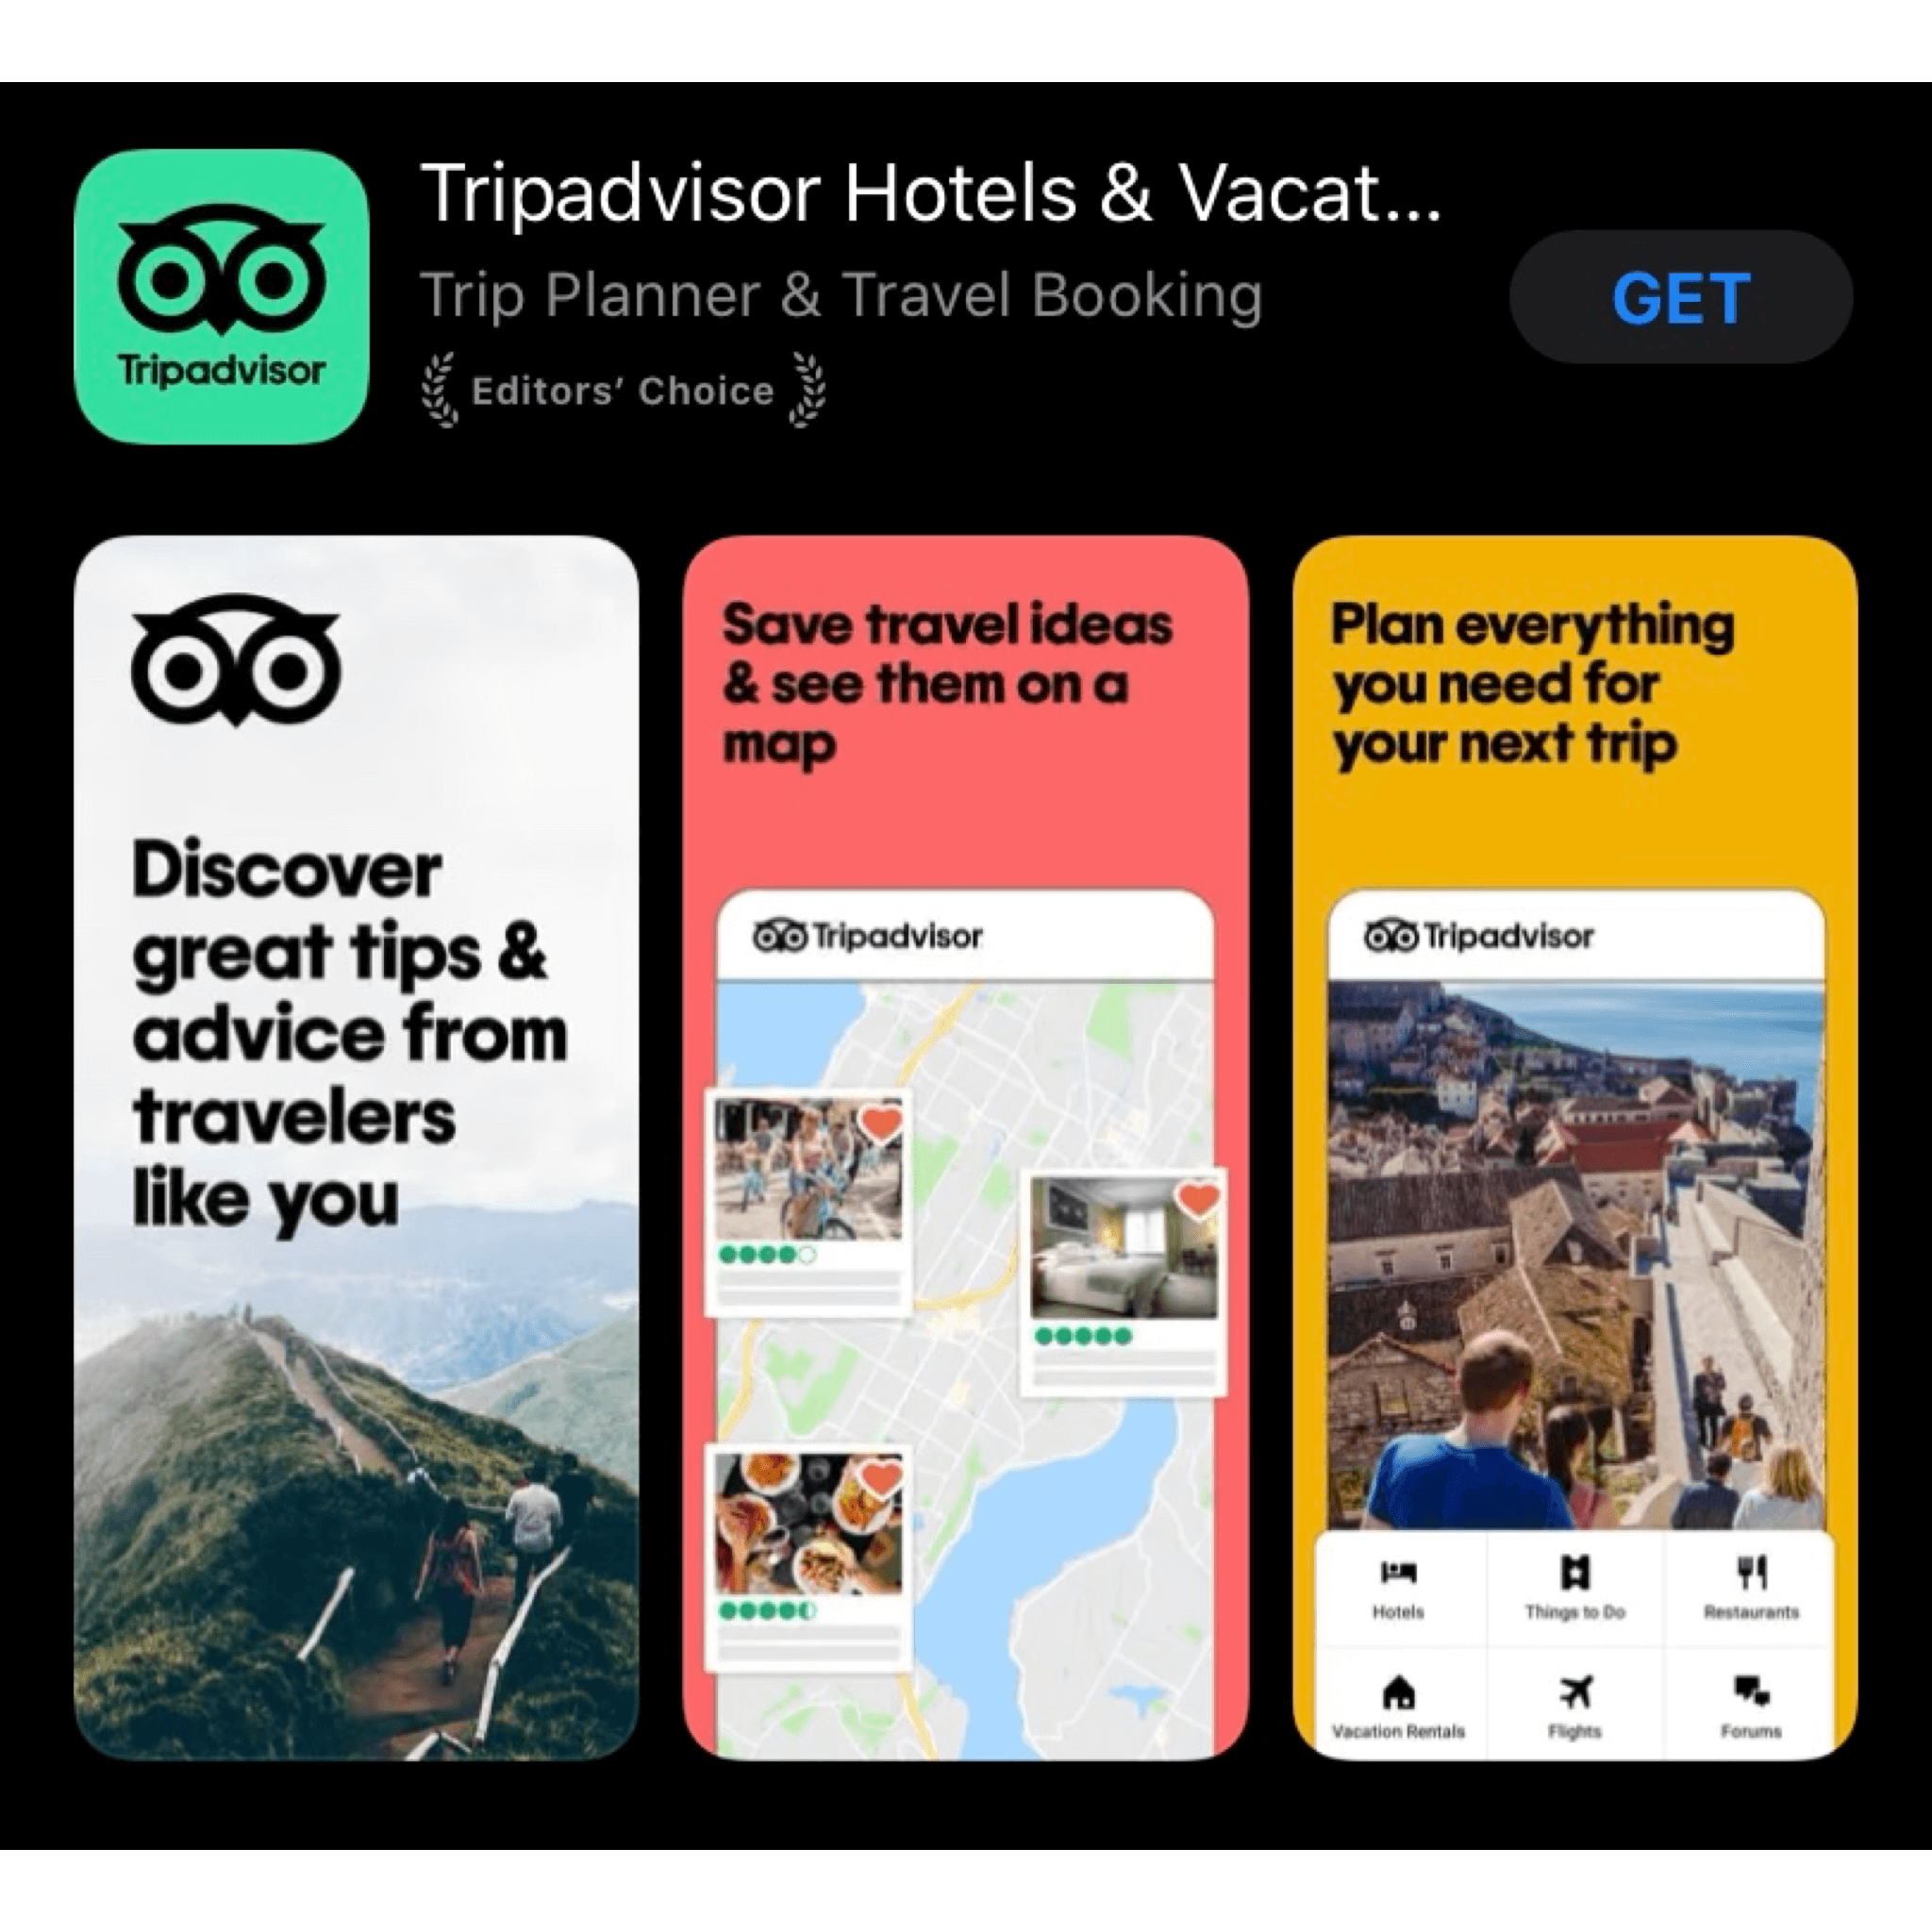 Tripadvisor launches ‘Travel Safe’ tools for travelers and businesses